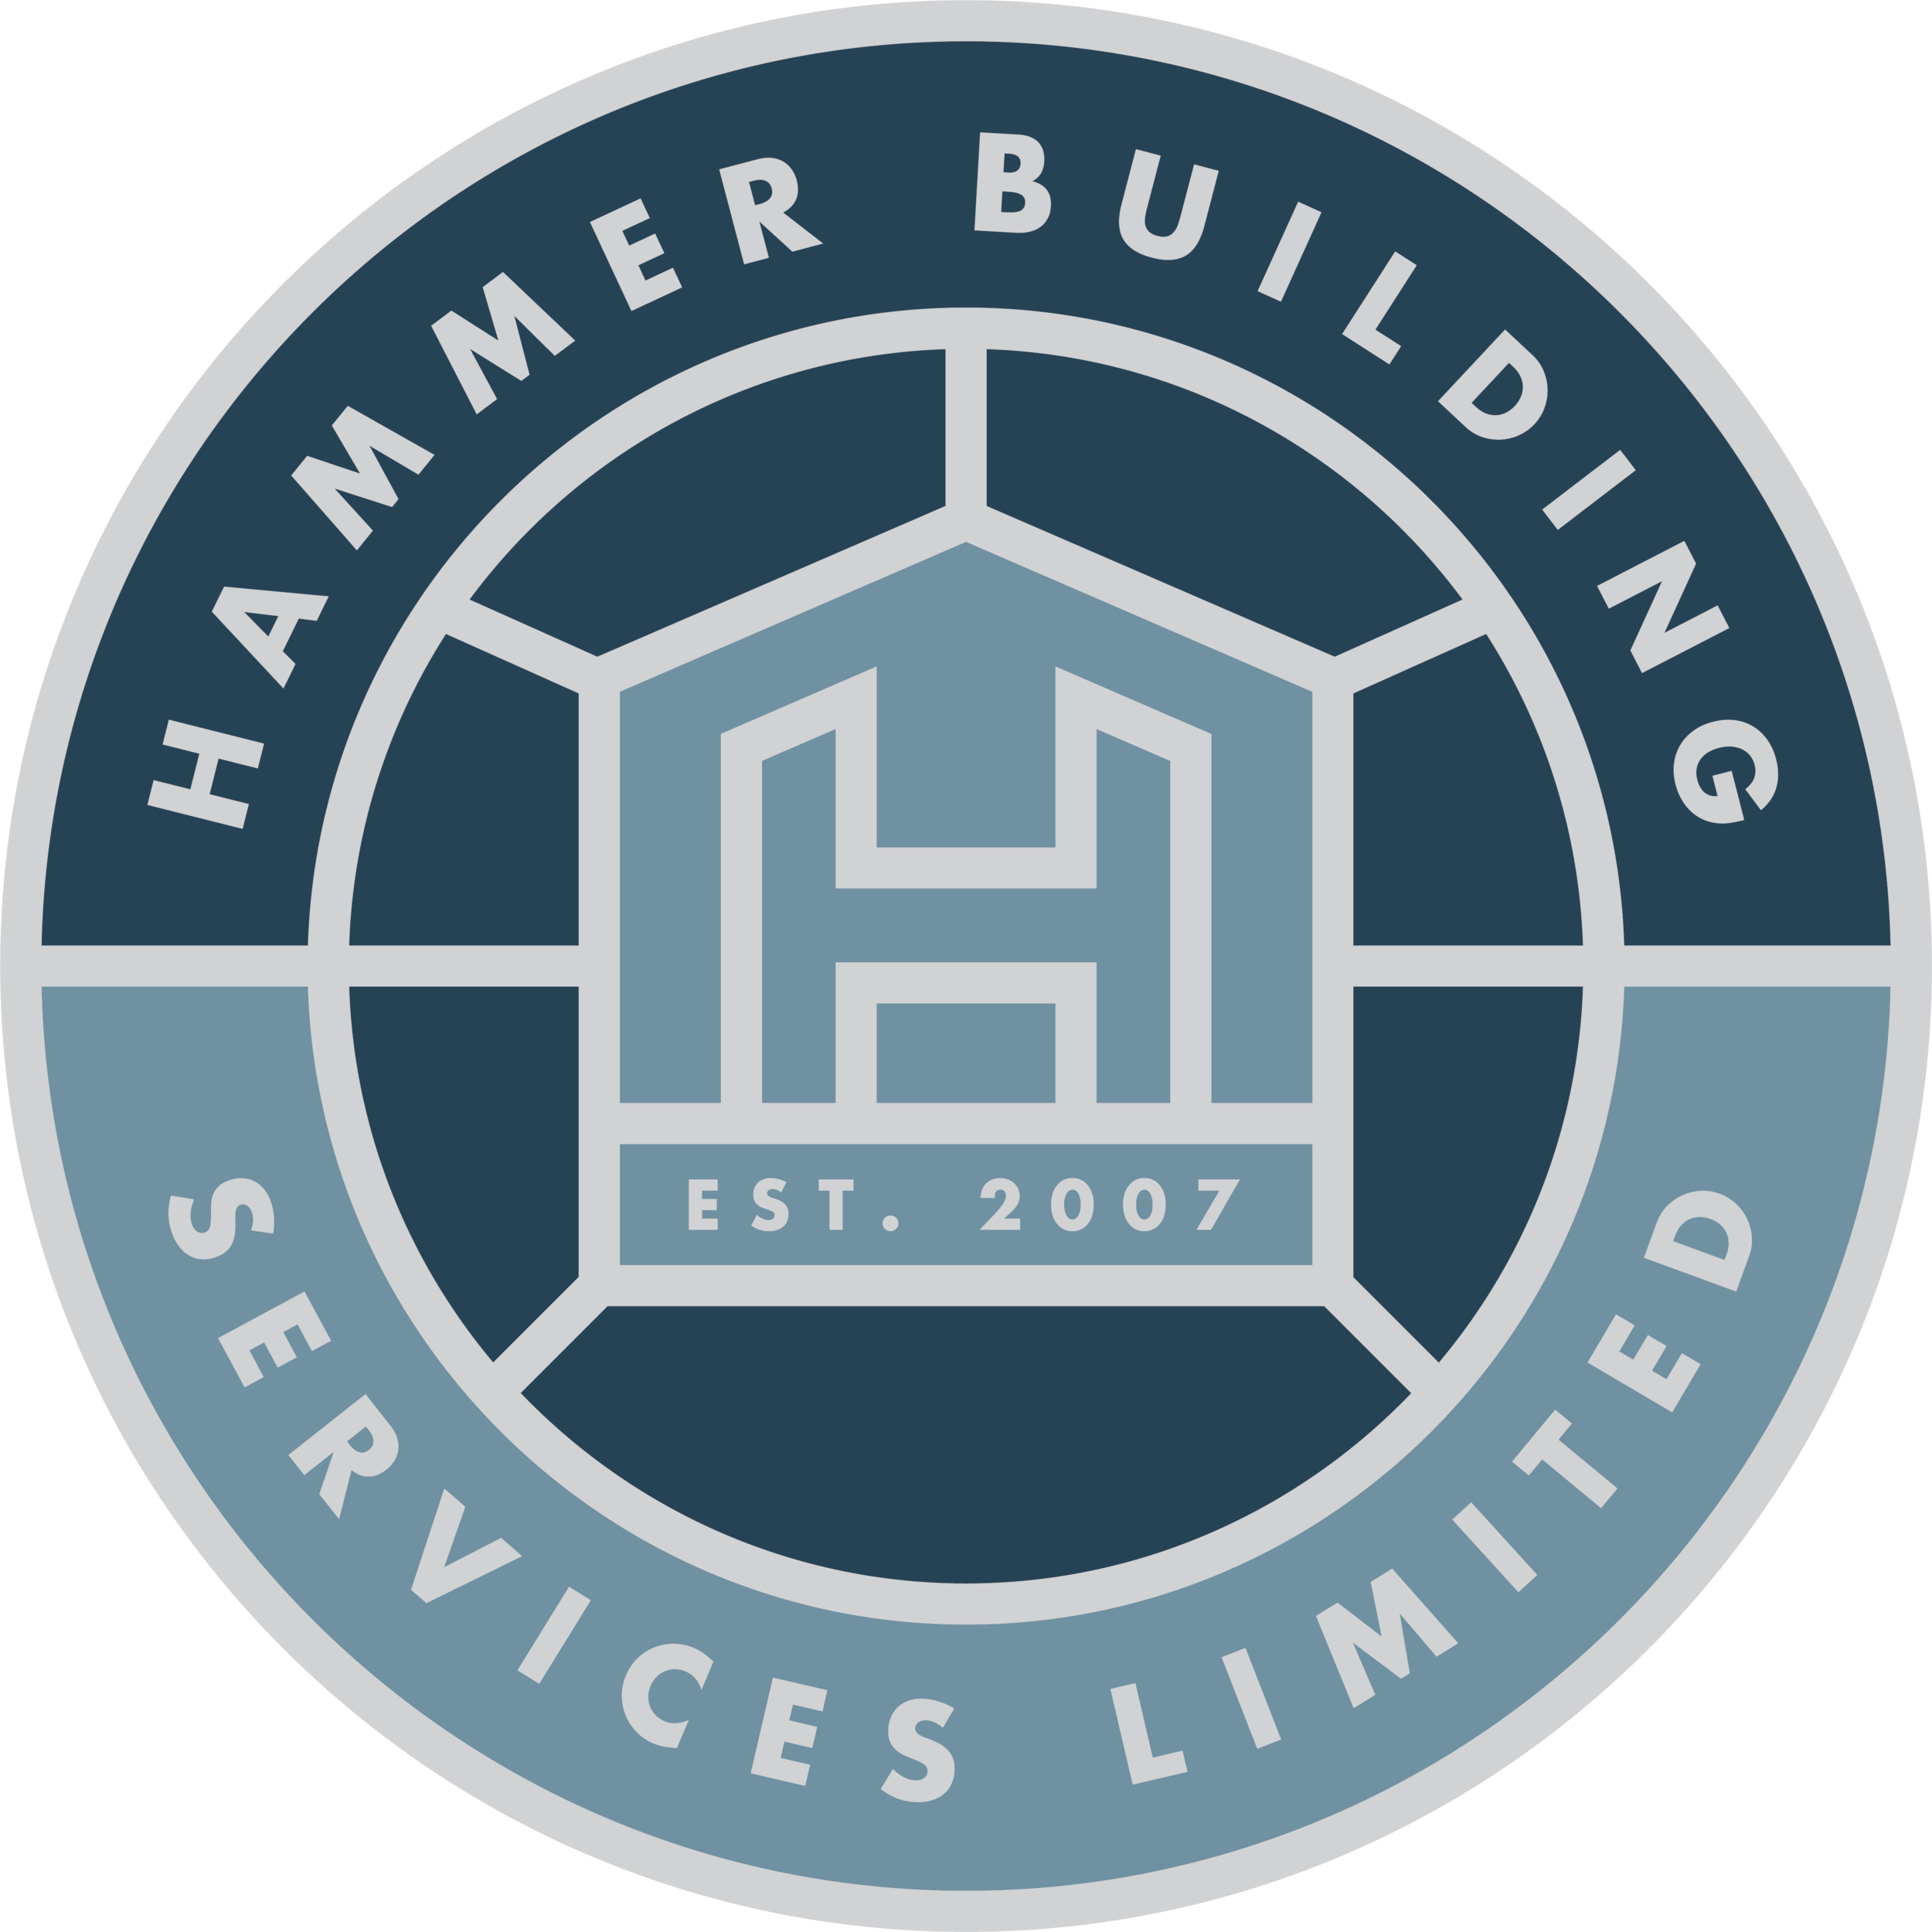 Hammer Building Services